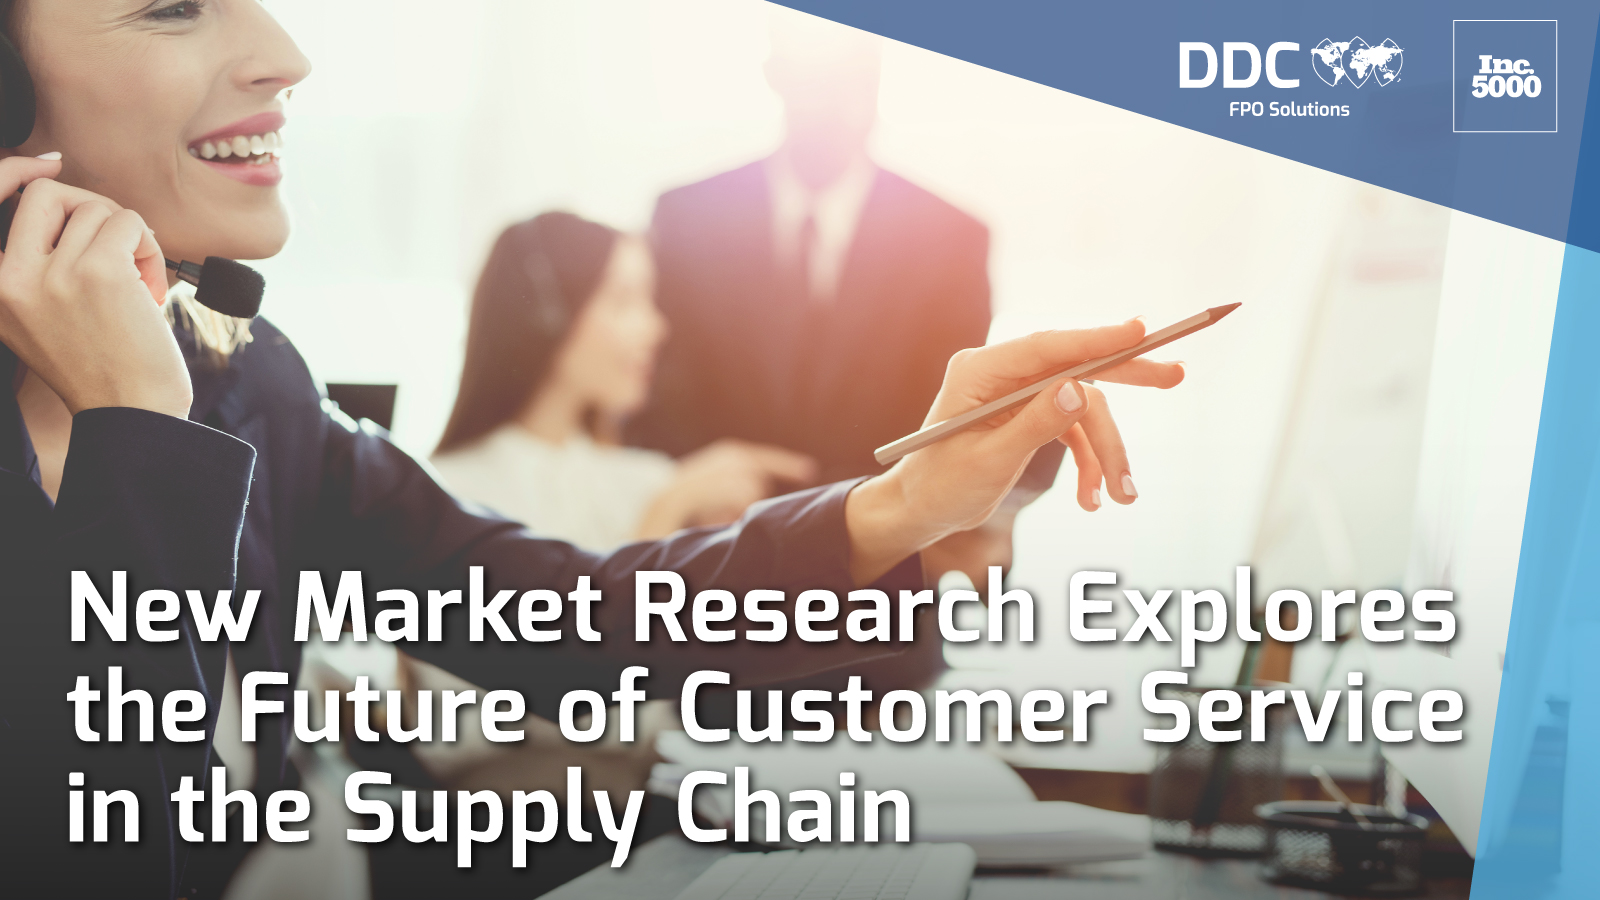 New Market Research Explores the Future of Customer Service in the Supply Chain